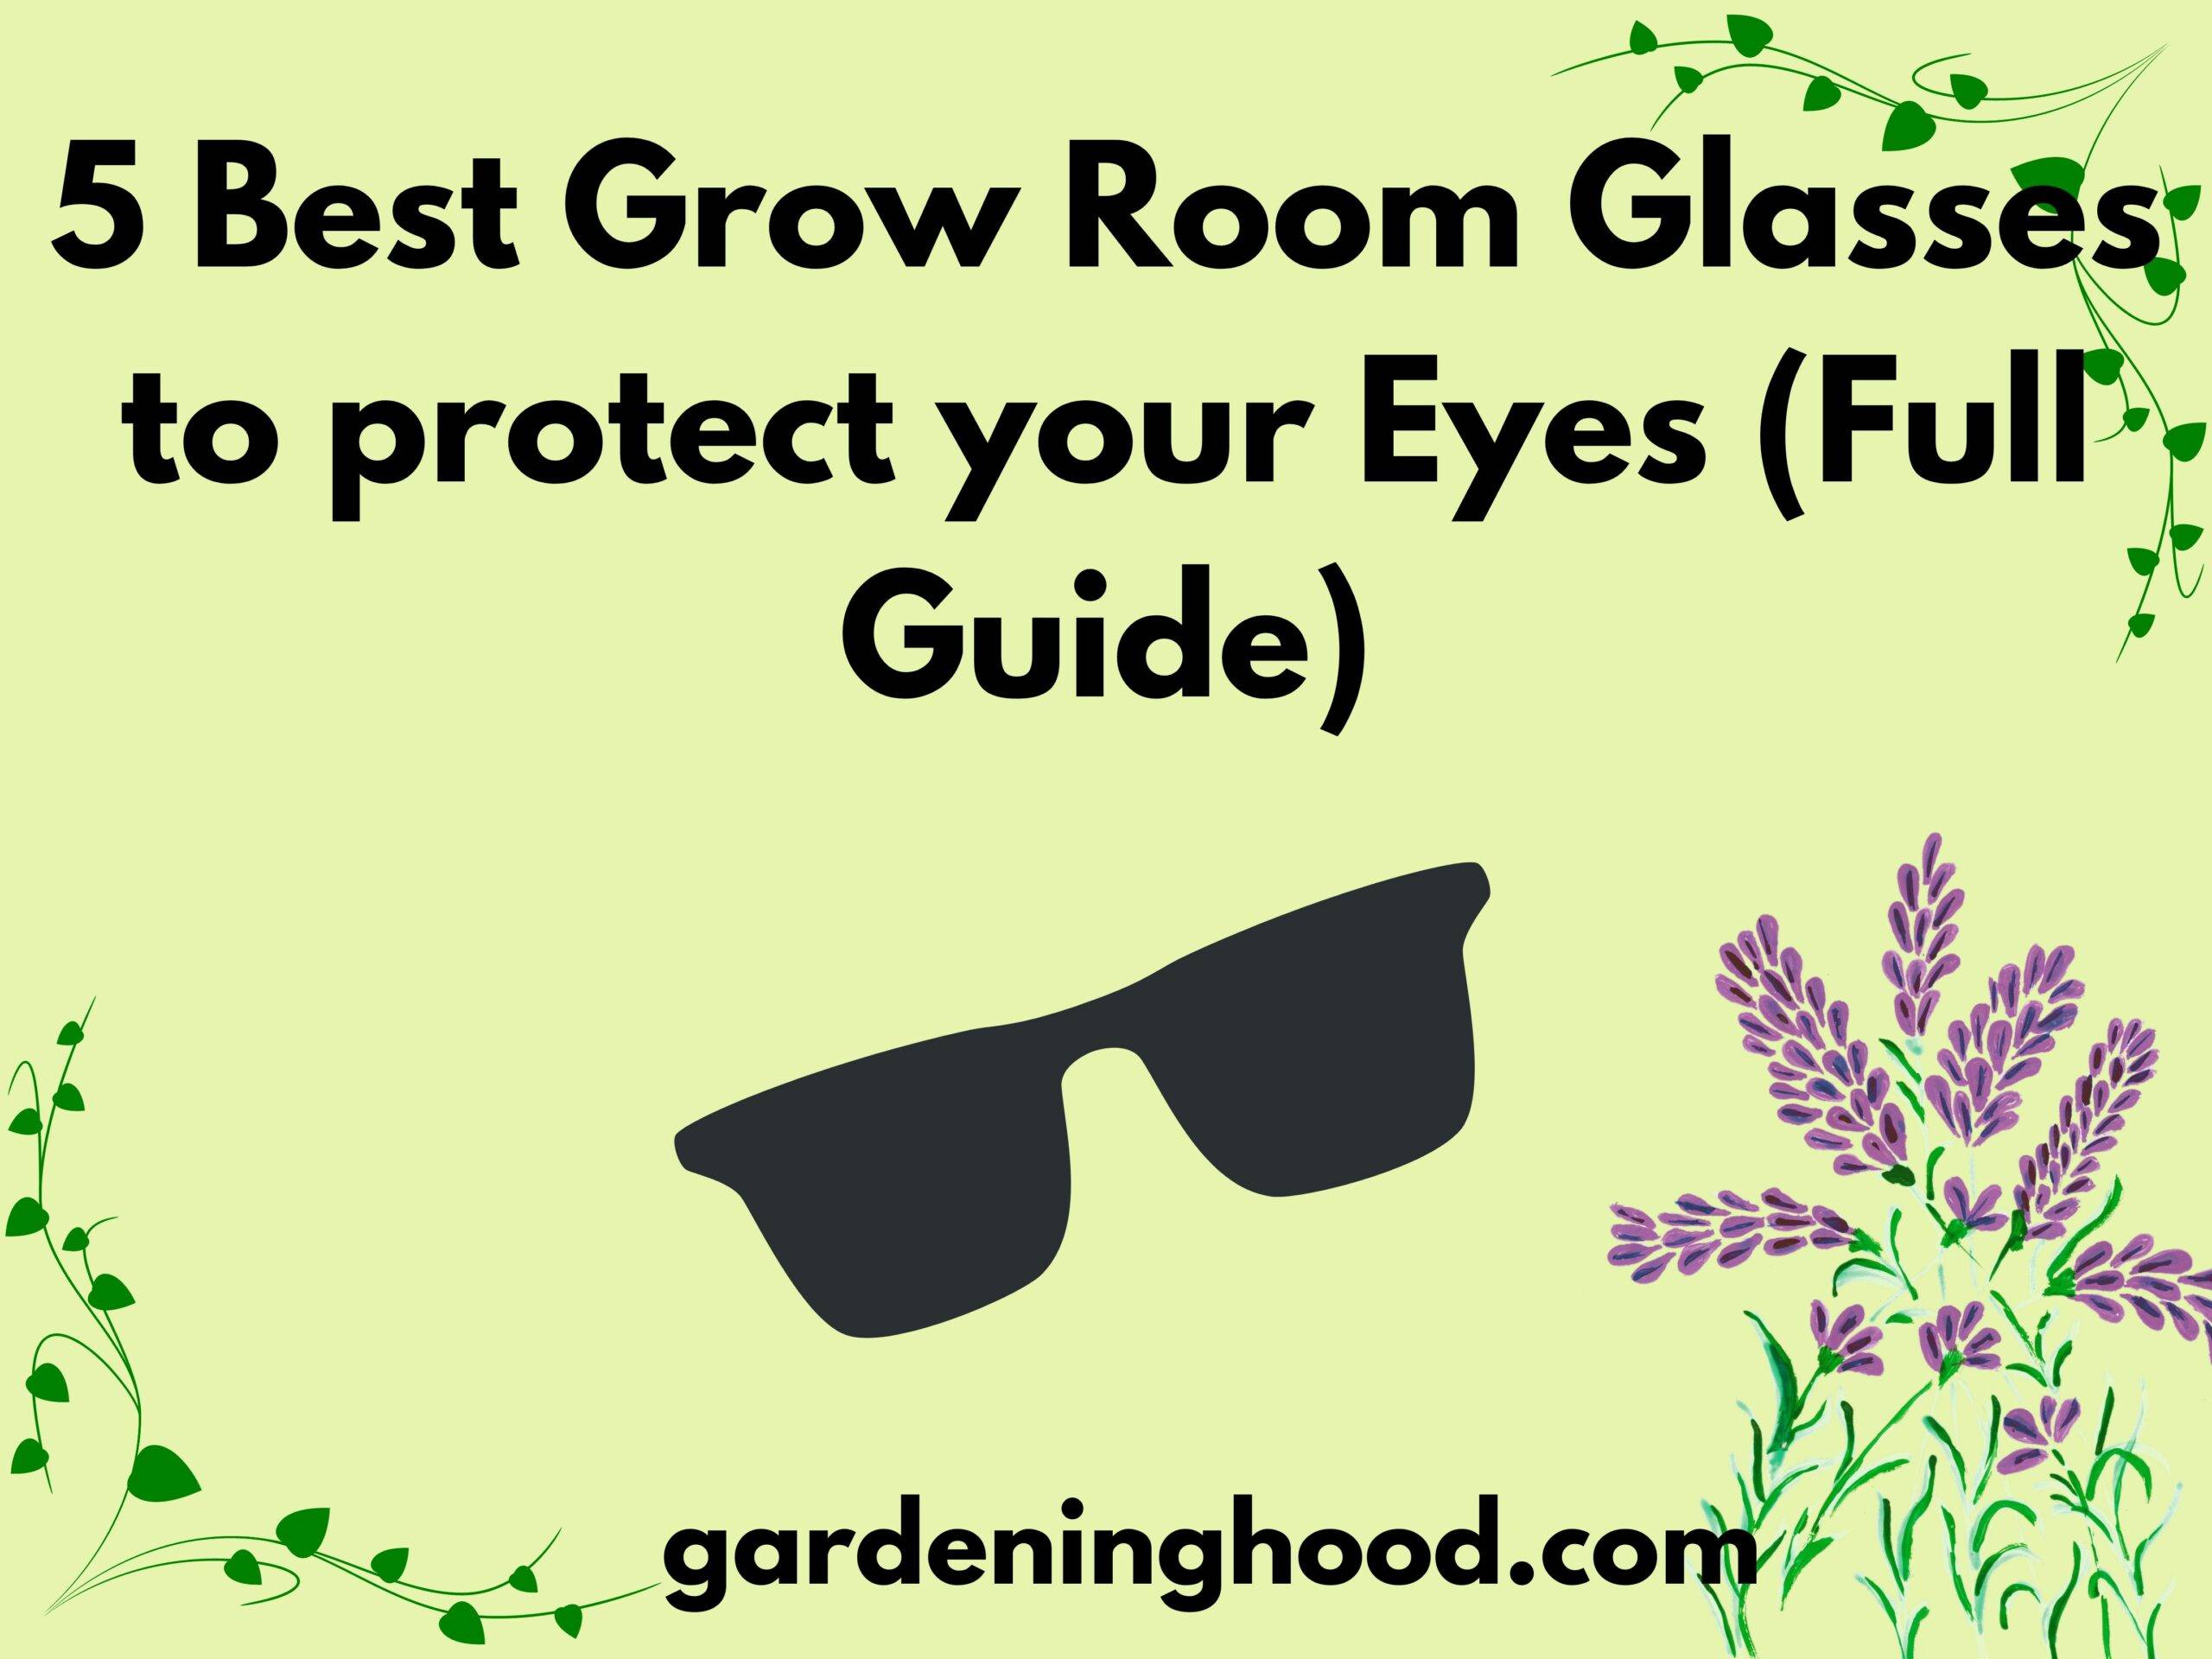 5 Best Grow Room Glasses to protect your Eyes (Full Guide)